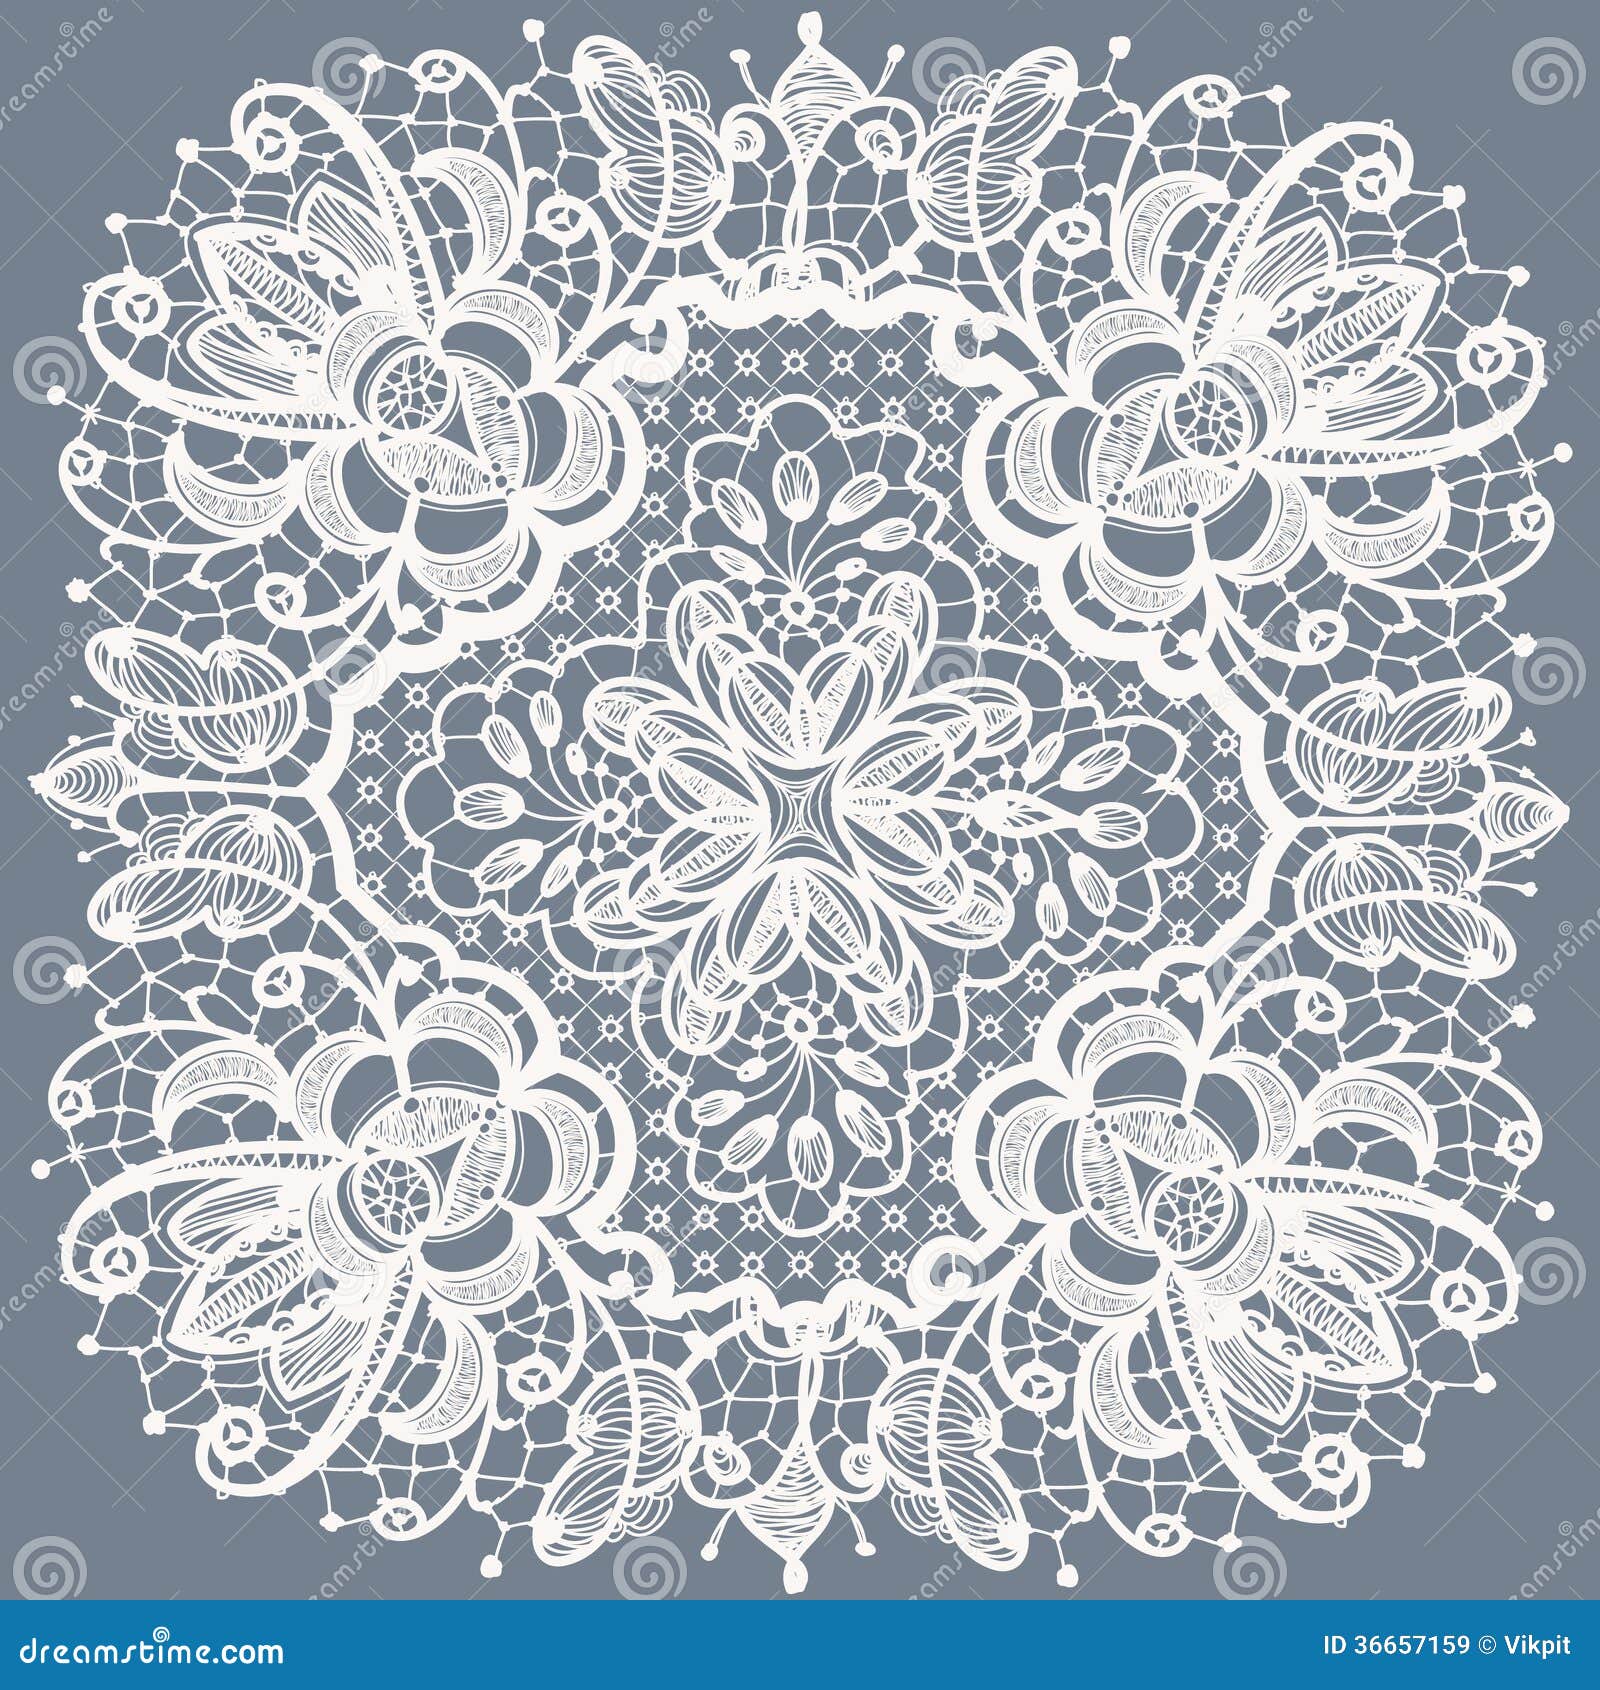 lace doily patterns.with s abstract flowers